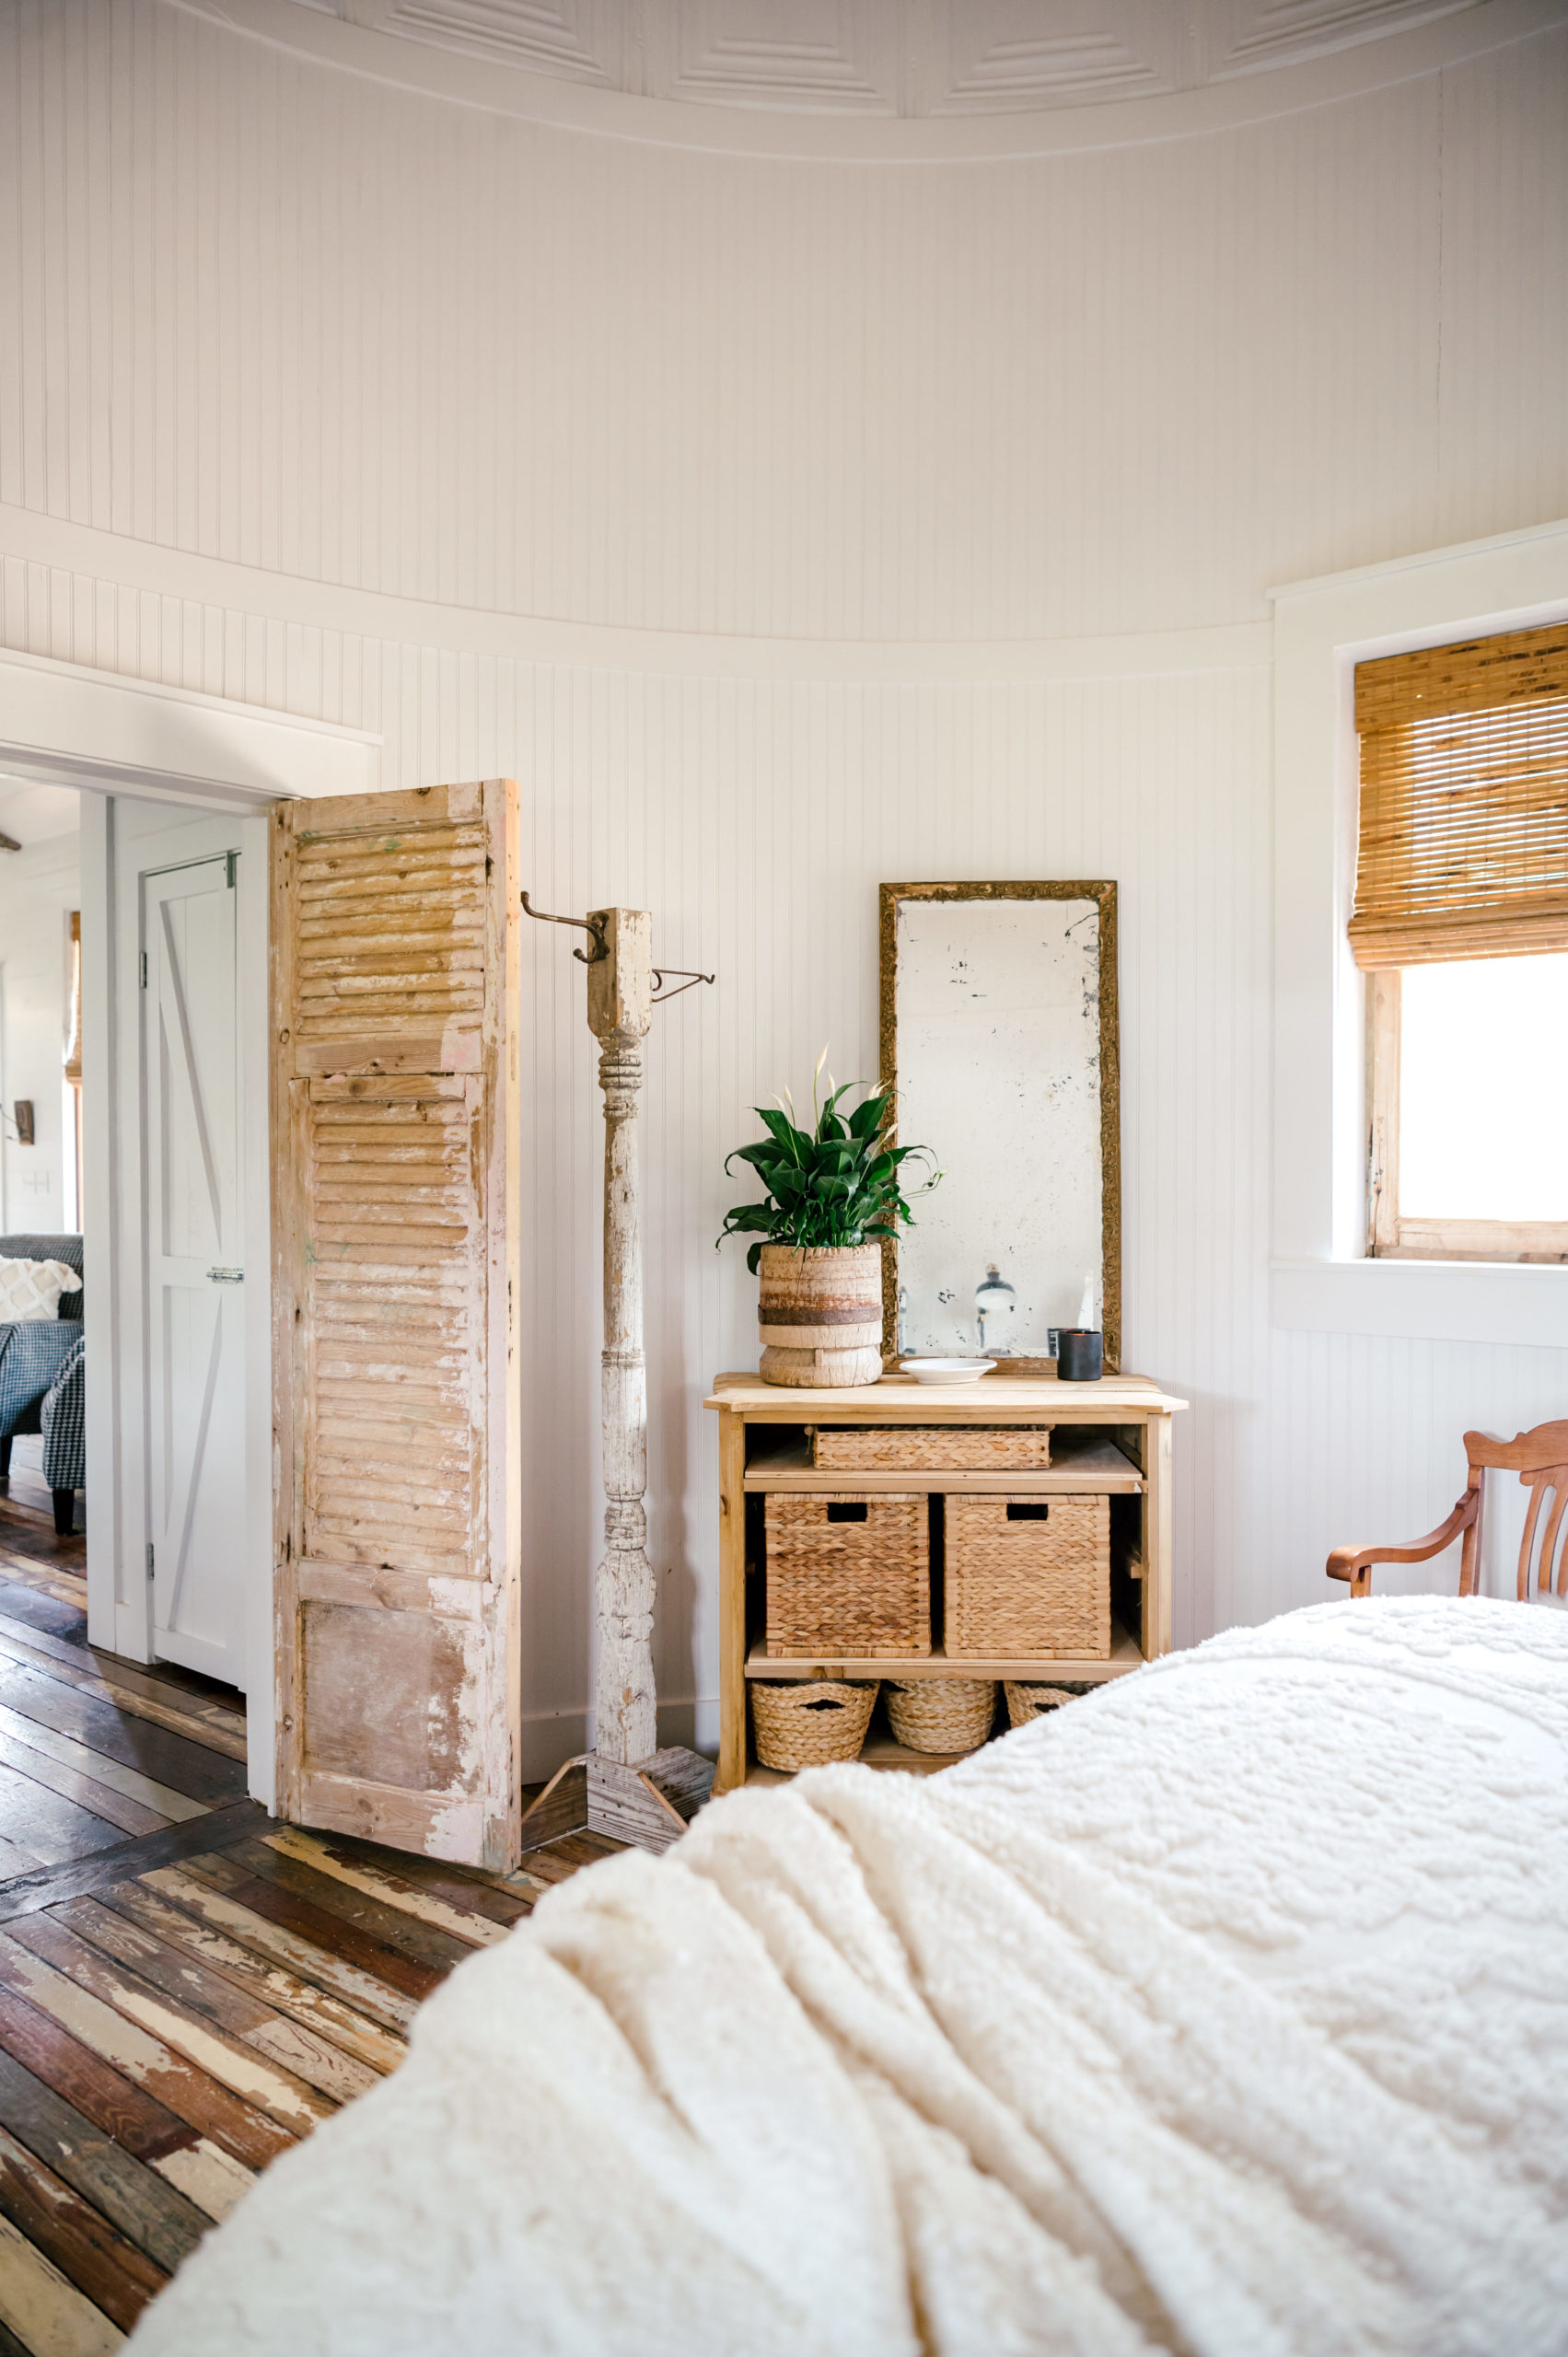 Airbnb photography of bedroom interior design, with wooden dresser and mirror